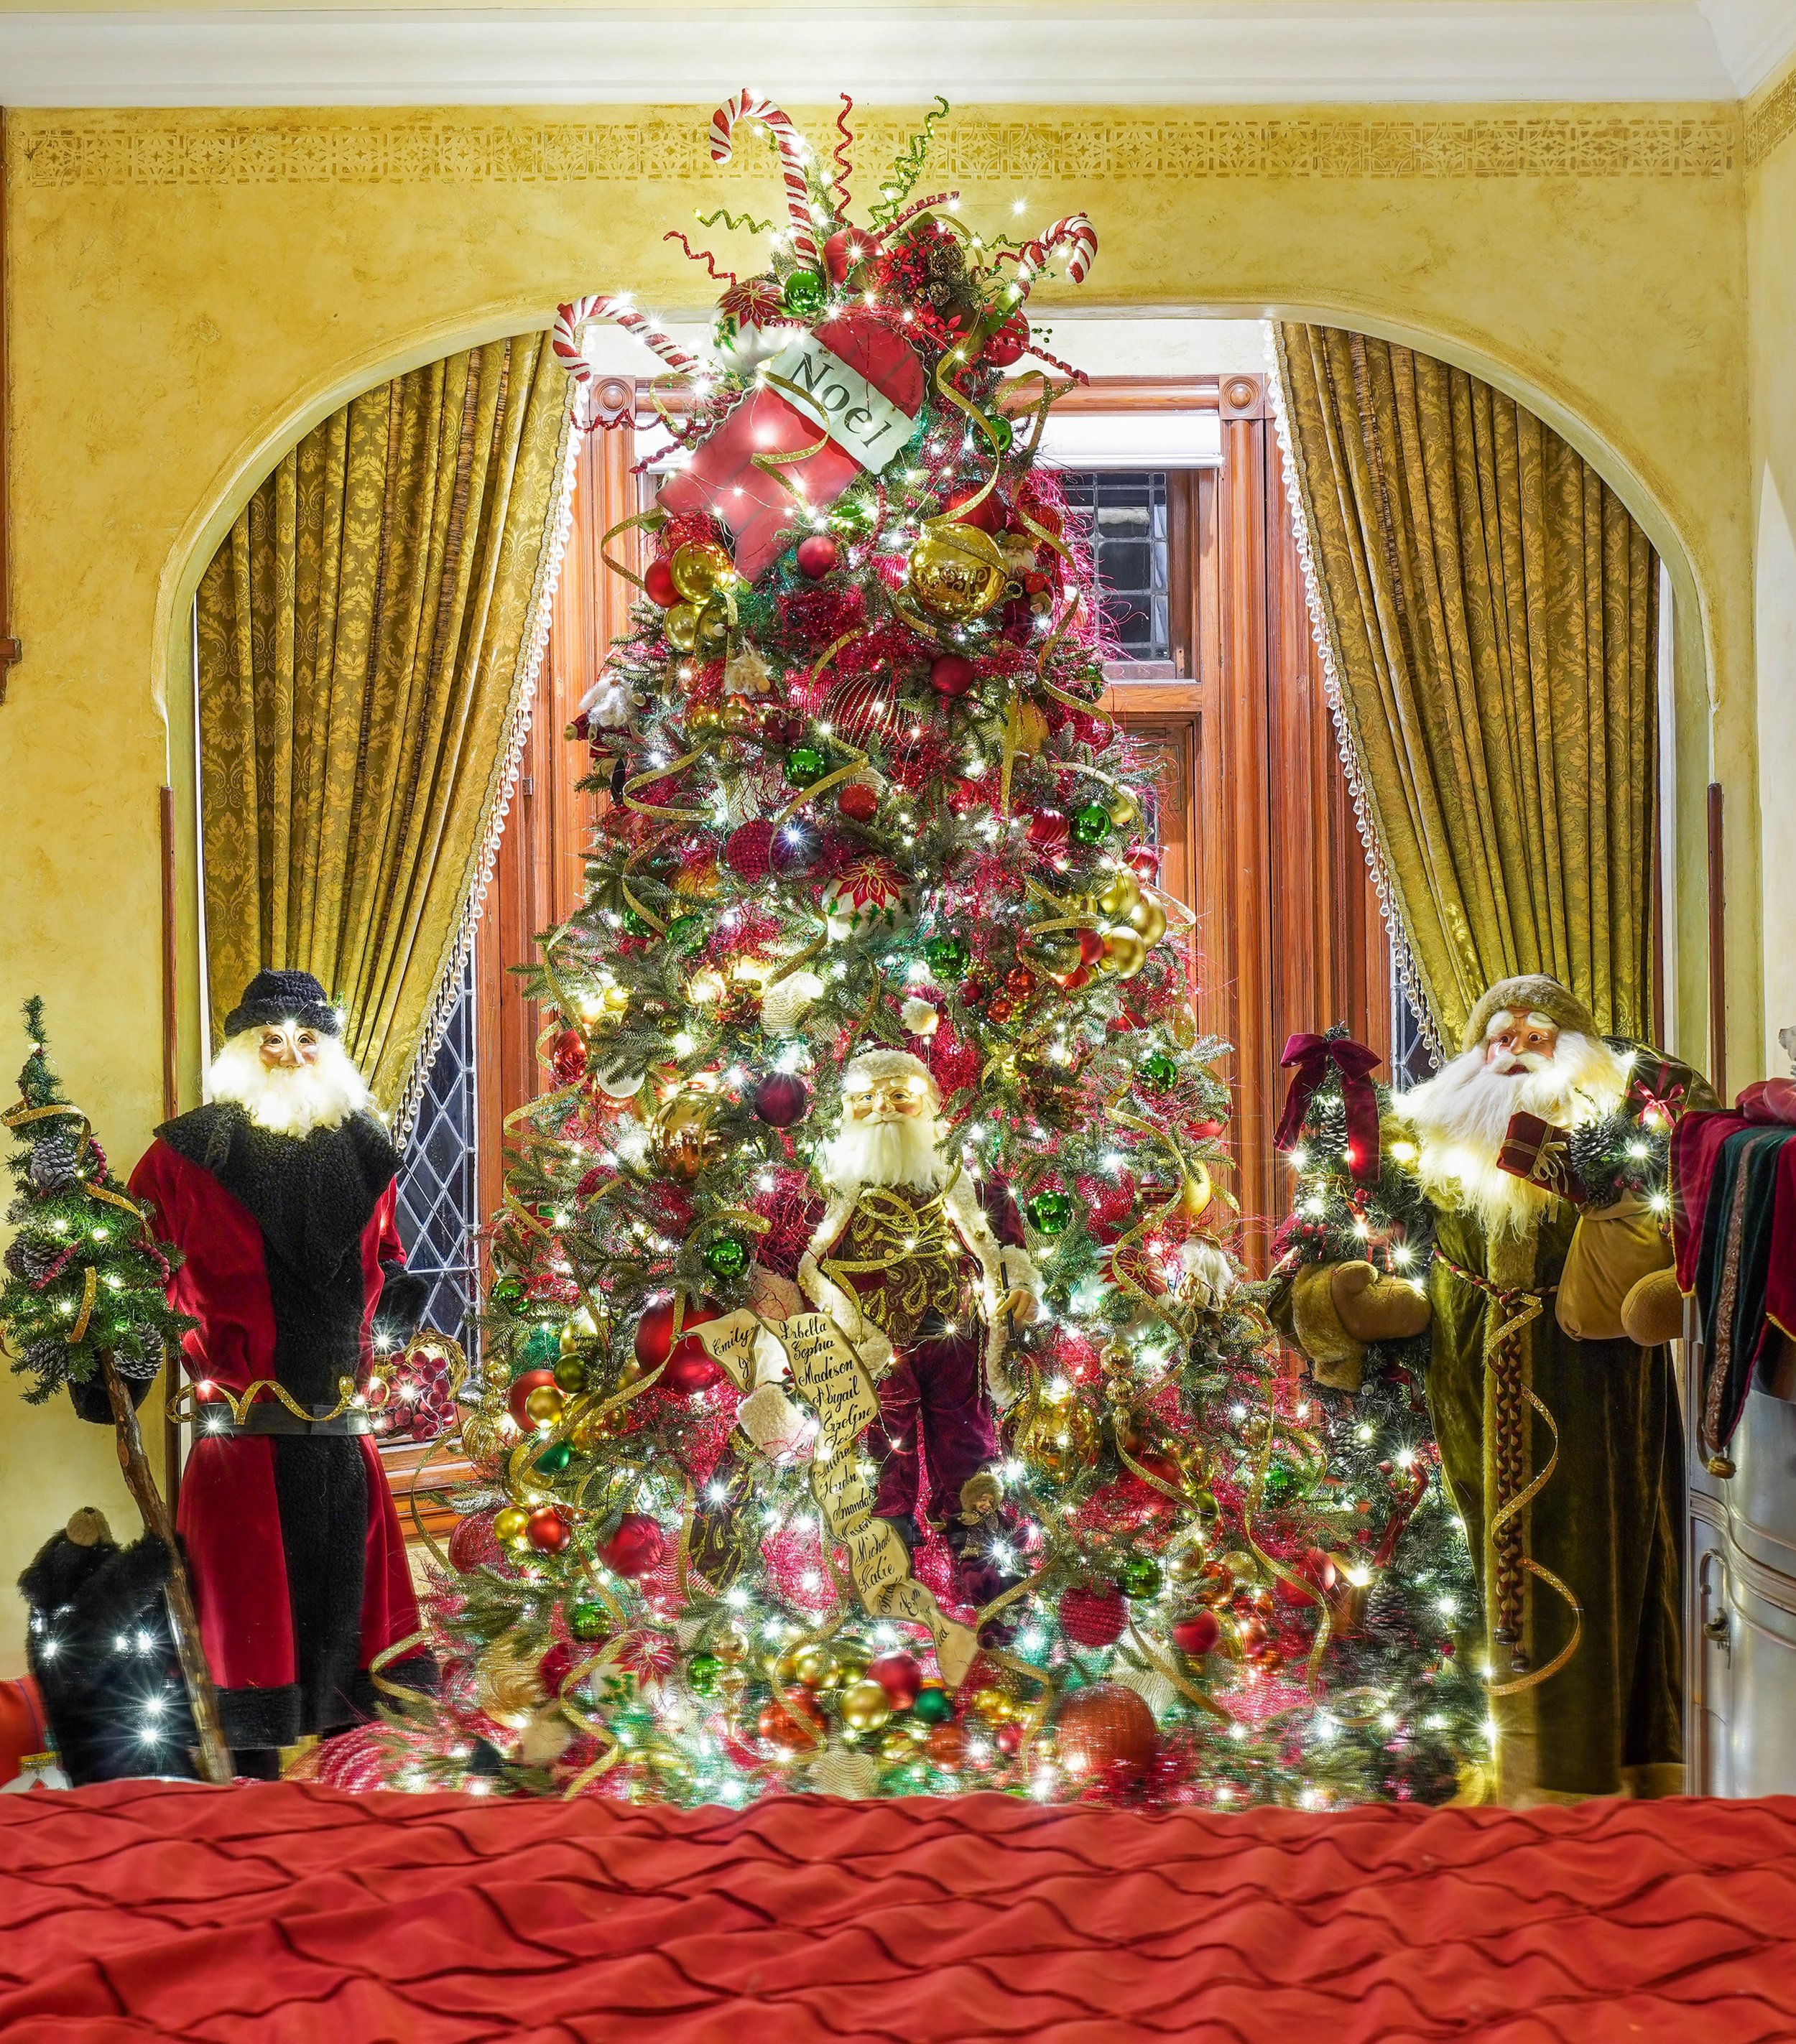 Best of show: Mueller House featured on annual Christmas tour